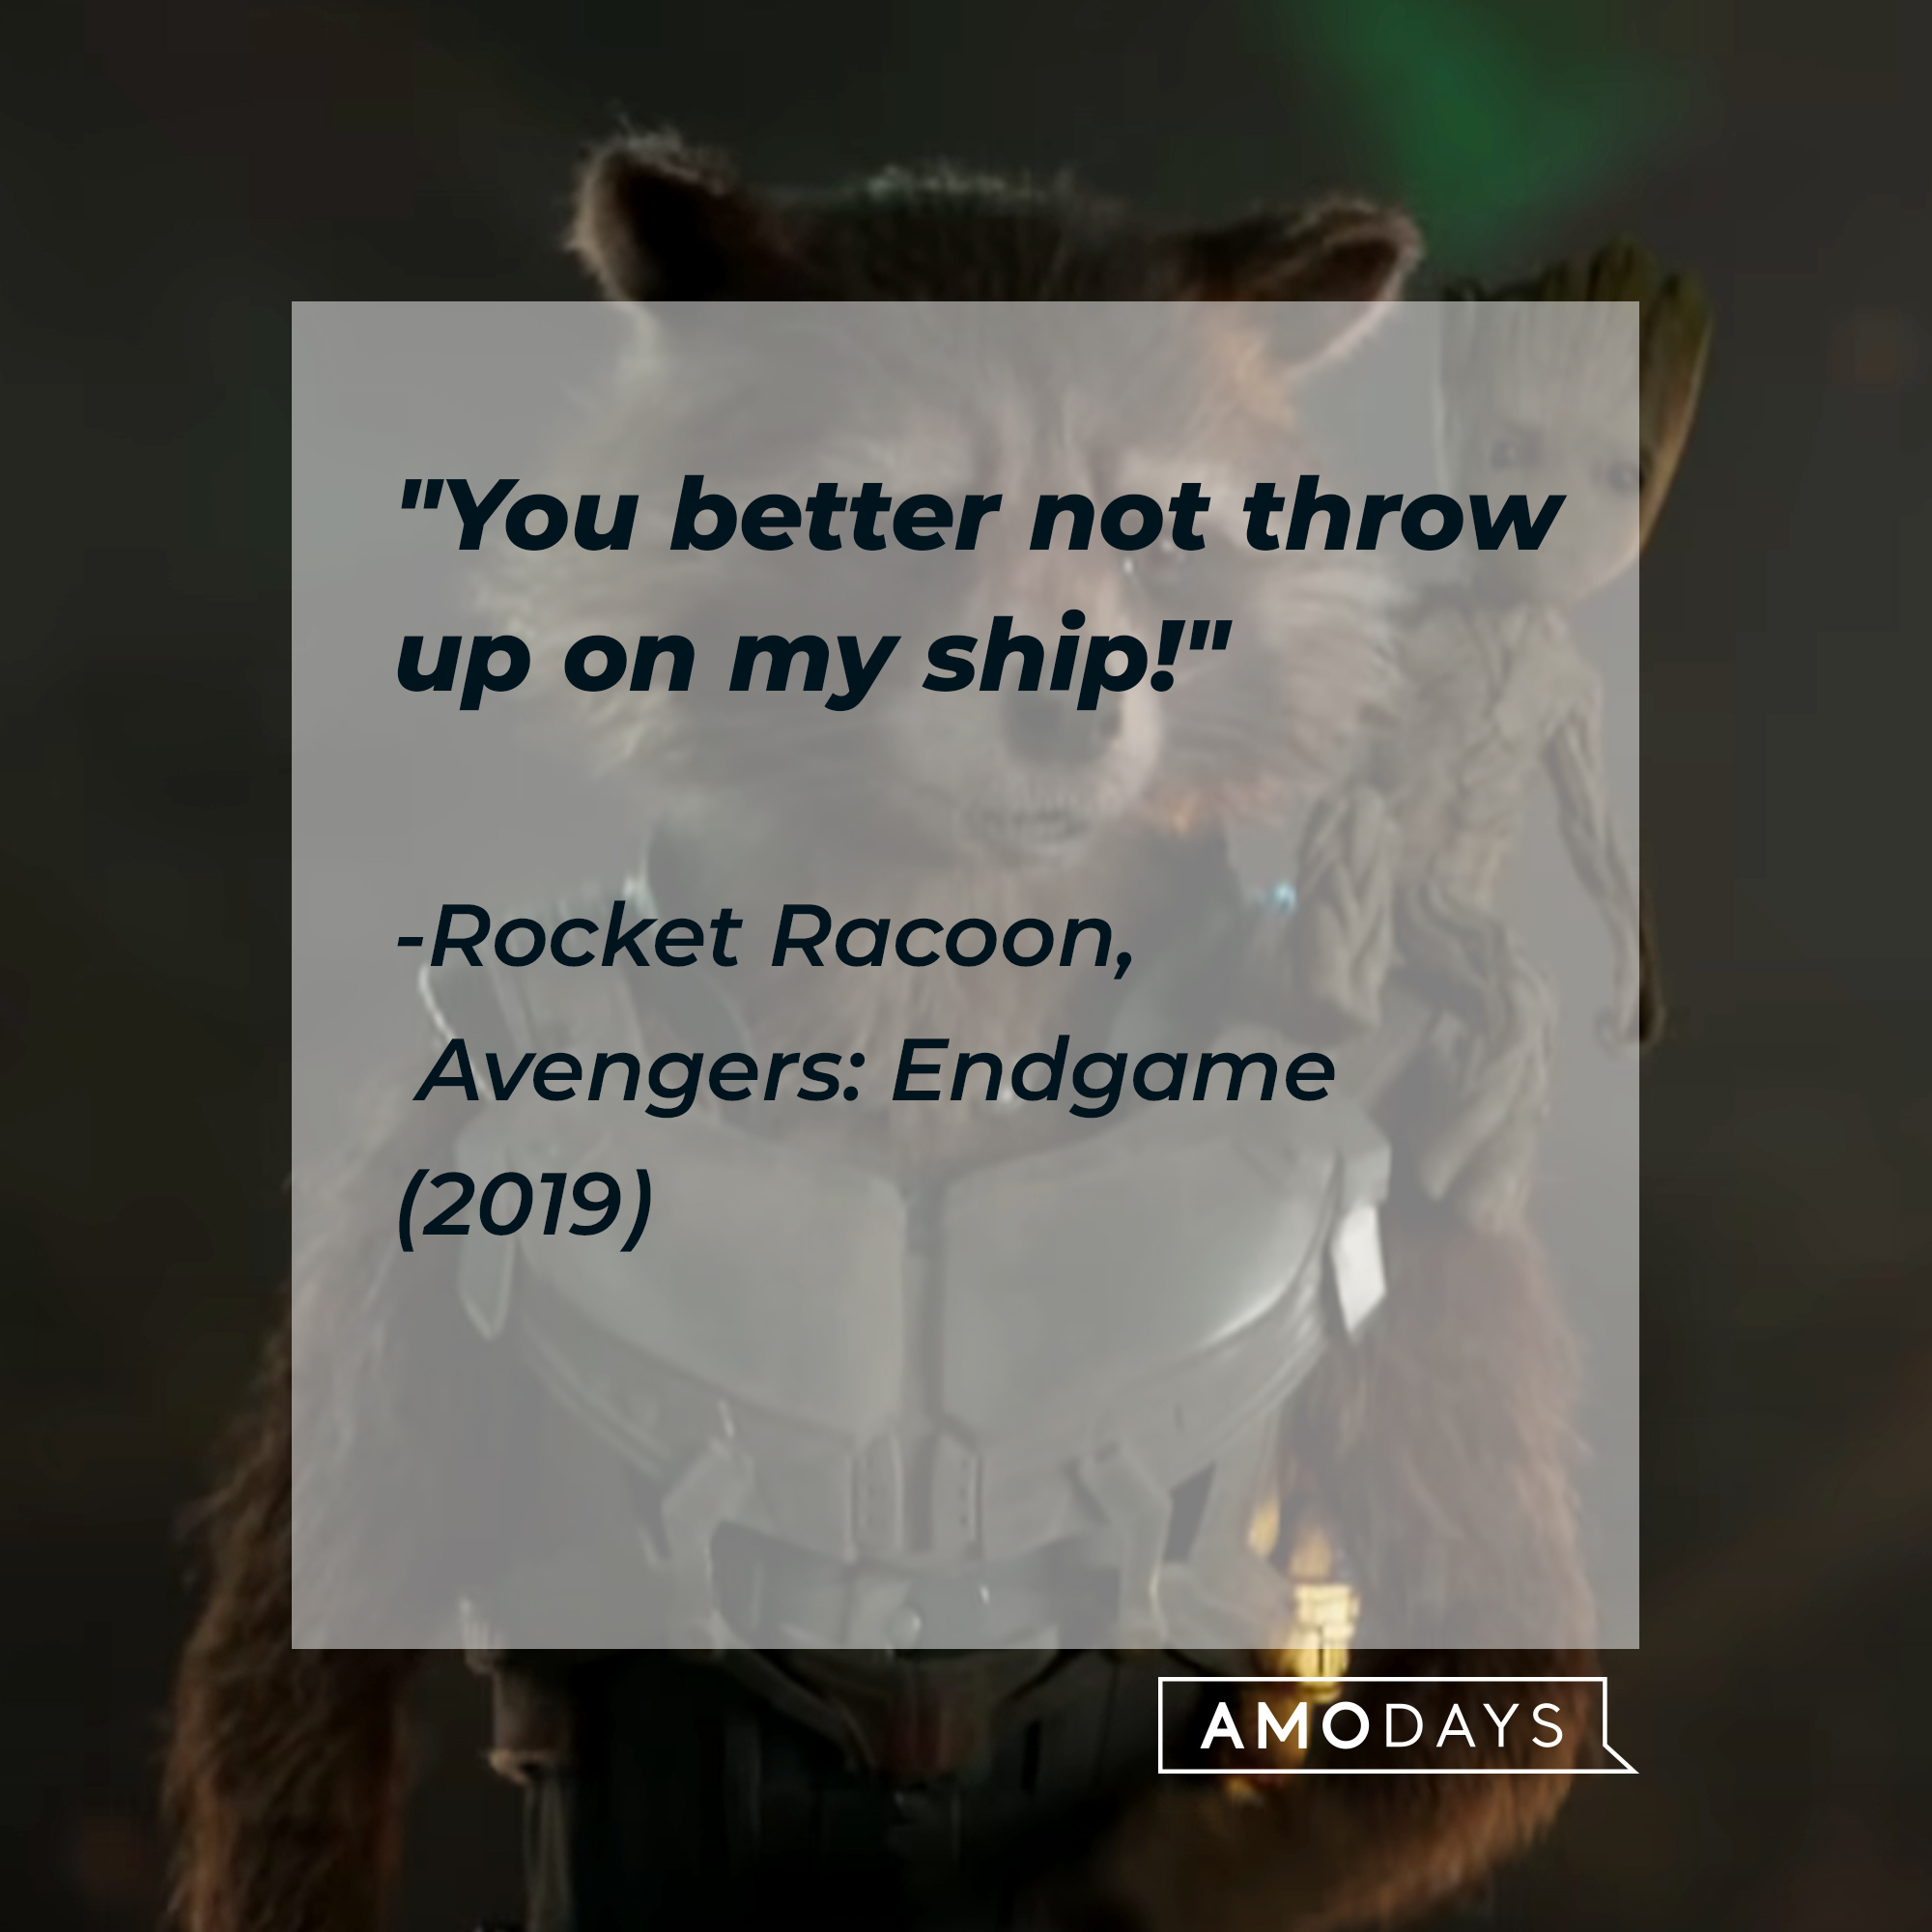 Rocket Raccoon's quote, "You better not throw up on my ship!" | Image: youtube.com/marvel